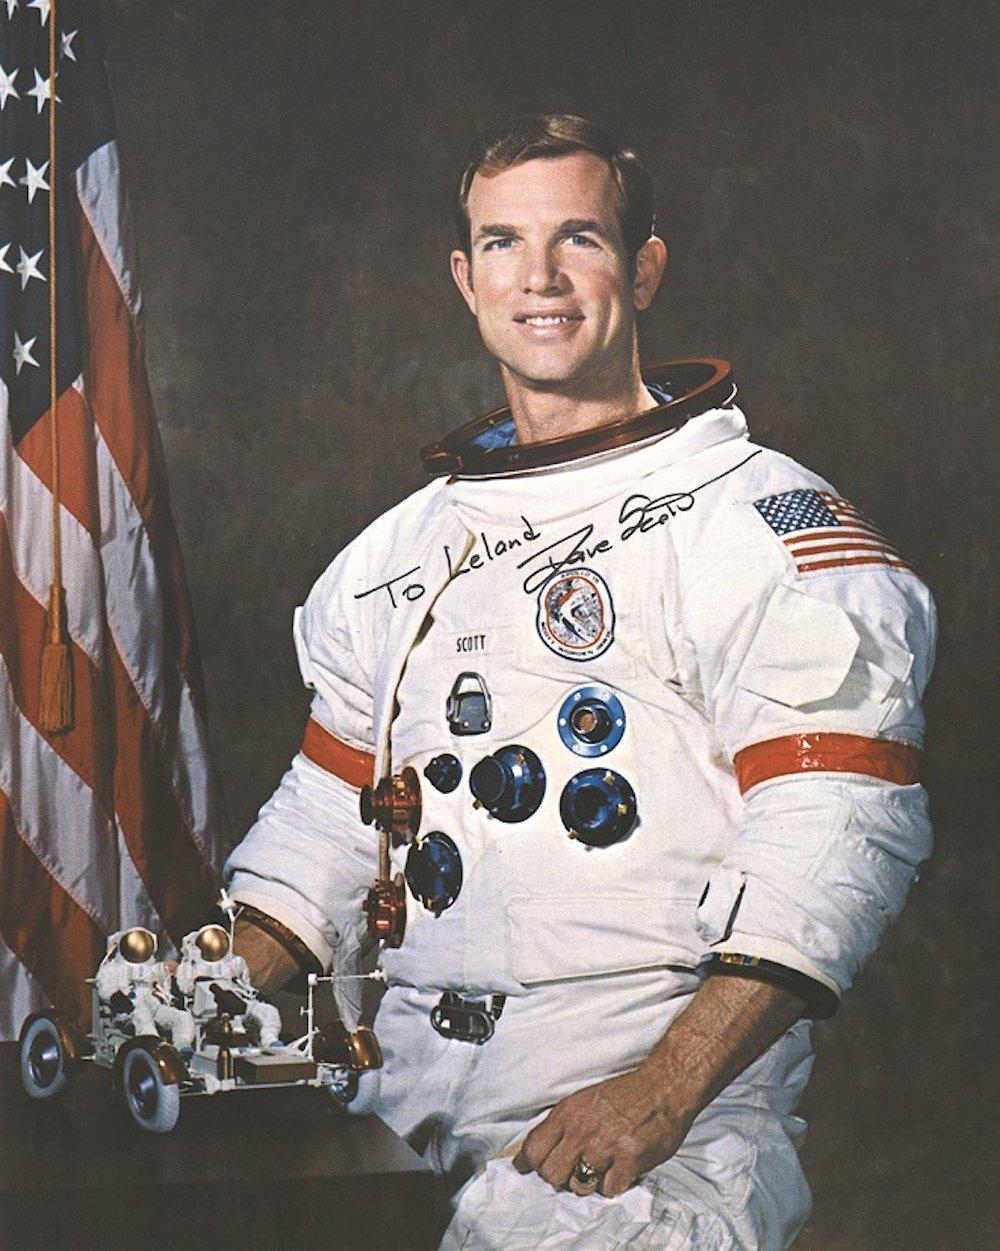 A signed photograph of Apollo 15 astronaut Dave Scott, the seventh man on the moon
David Scott (1932 -) is an American aviator and NASA astronaut who became the seventh man to walk on the moon during the Apollo 15 mission in July 1971.

Scott had